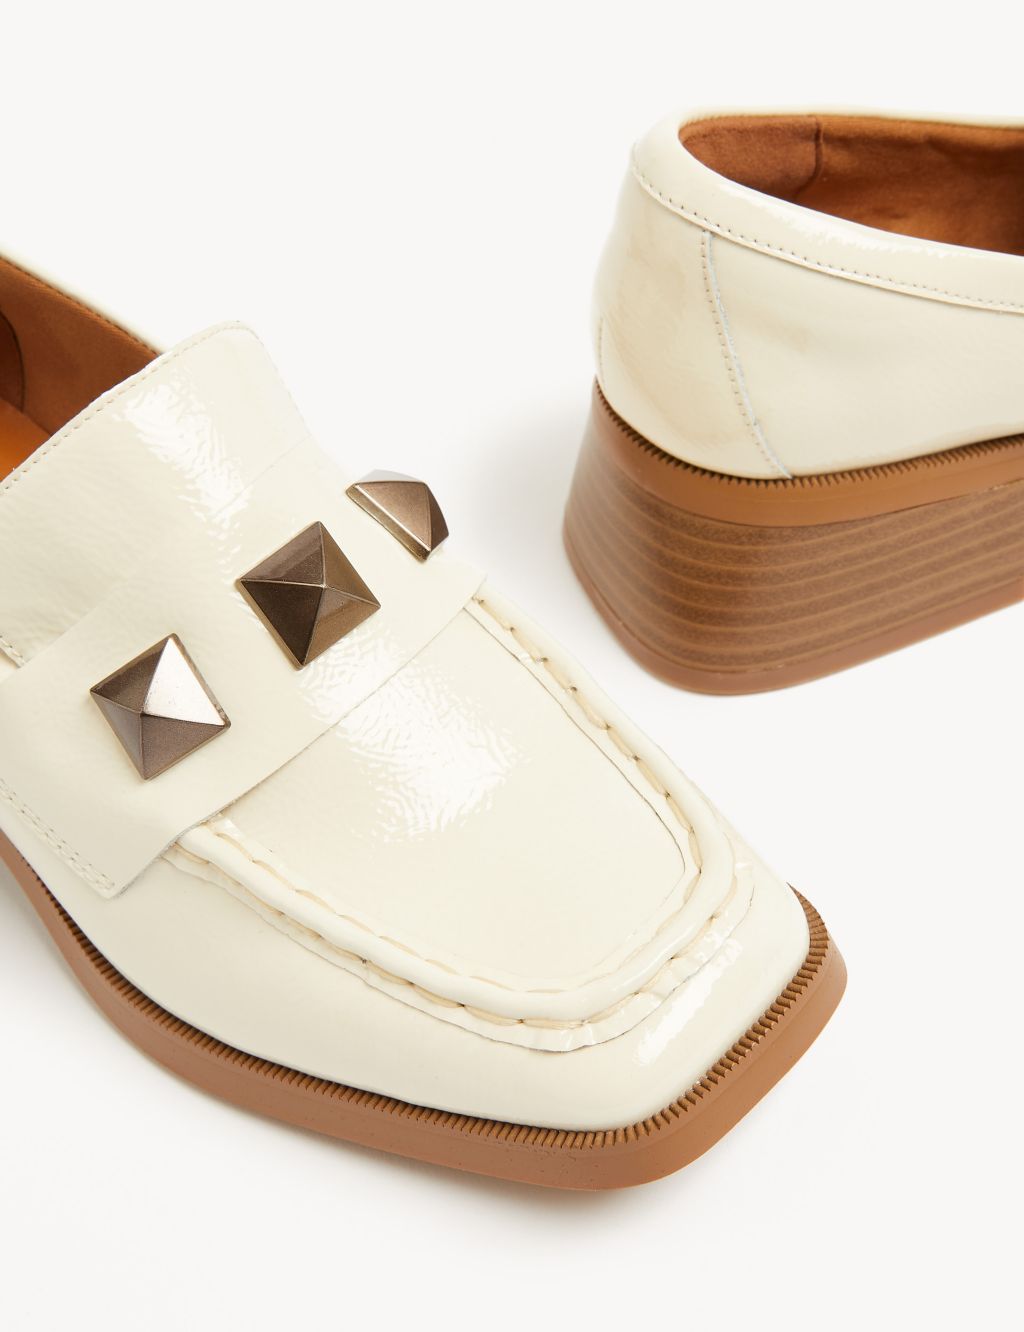 Wide Fit Leather Patent Block Heel Loafers image 2